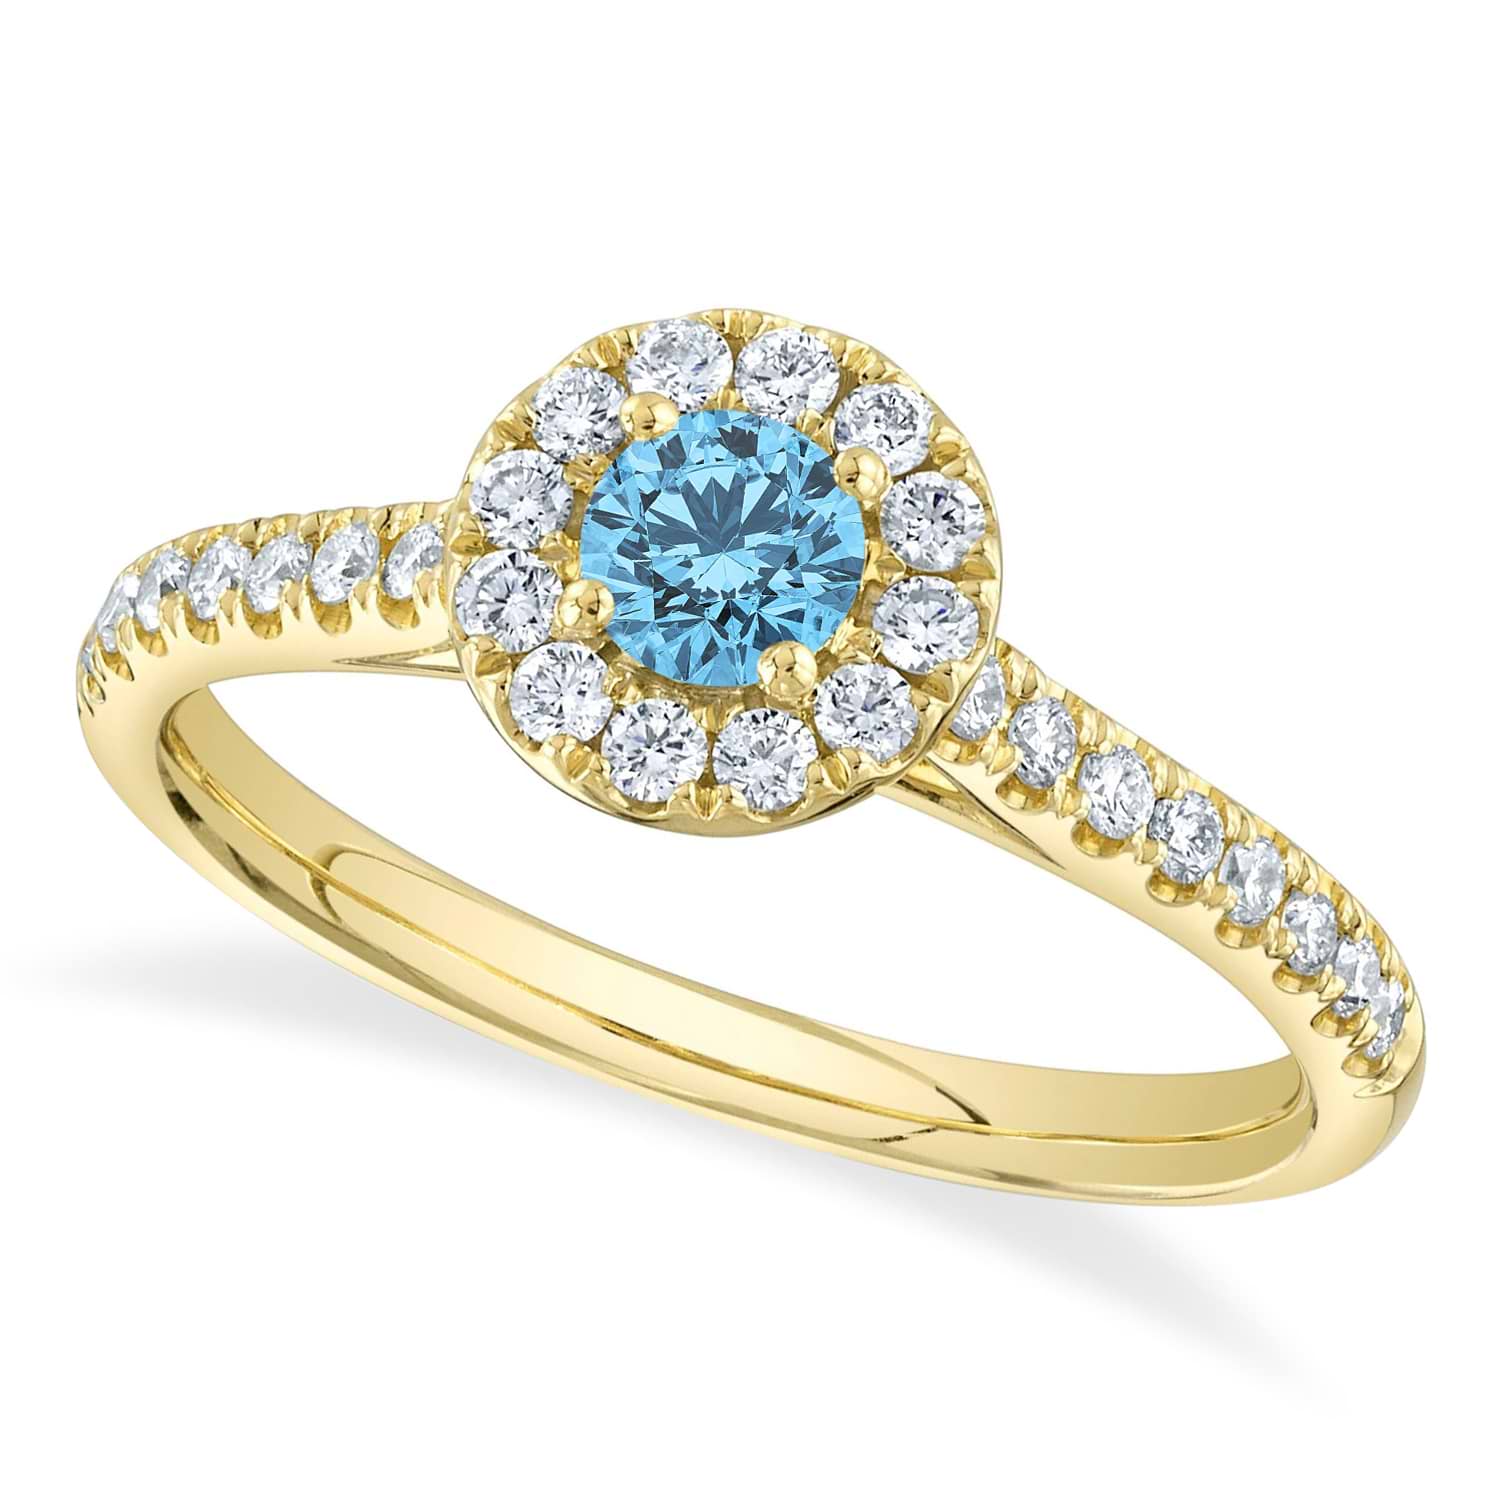 Round Blue Topaz Solitaire & Diamond Engagement Ring 14K Yellow Gold (0.65ct)